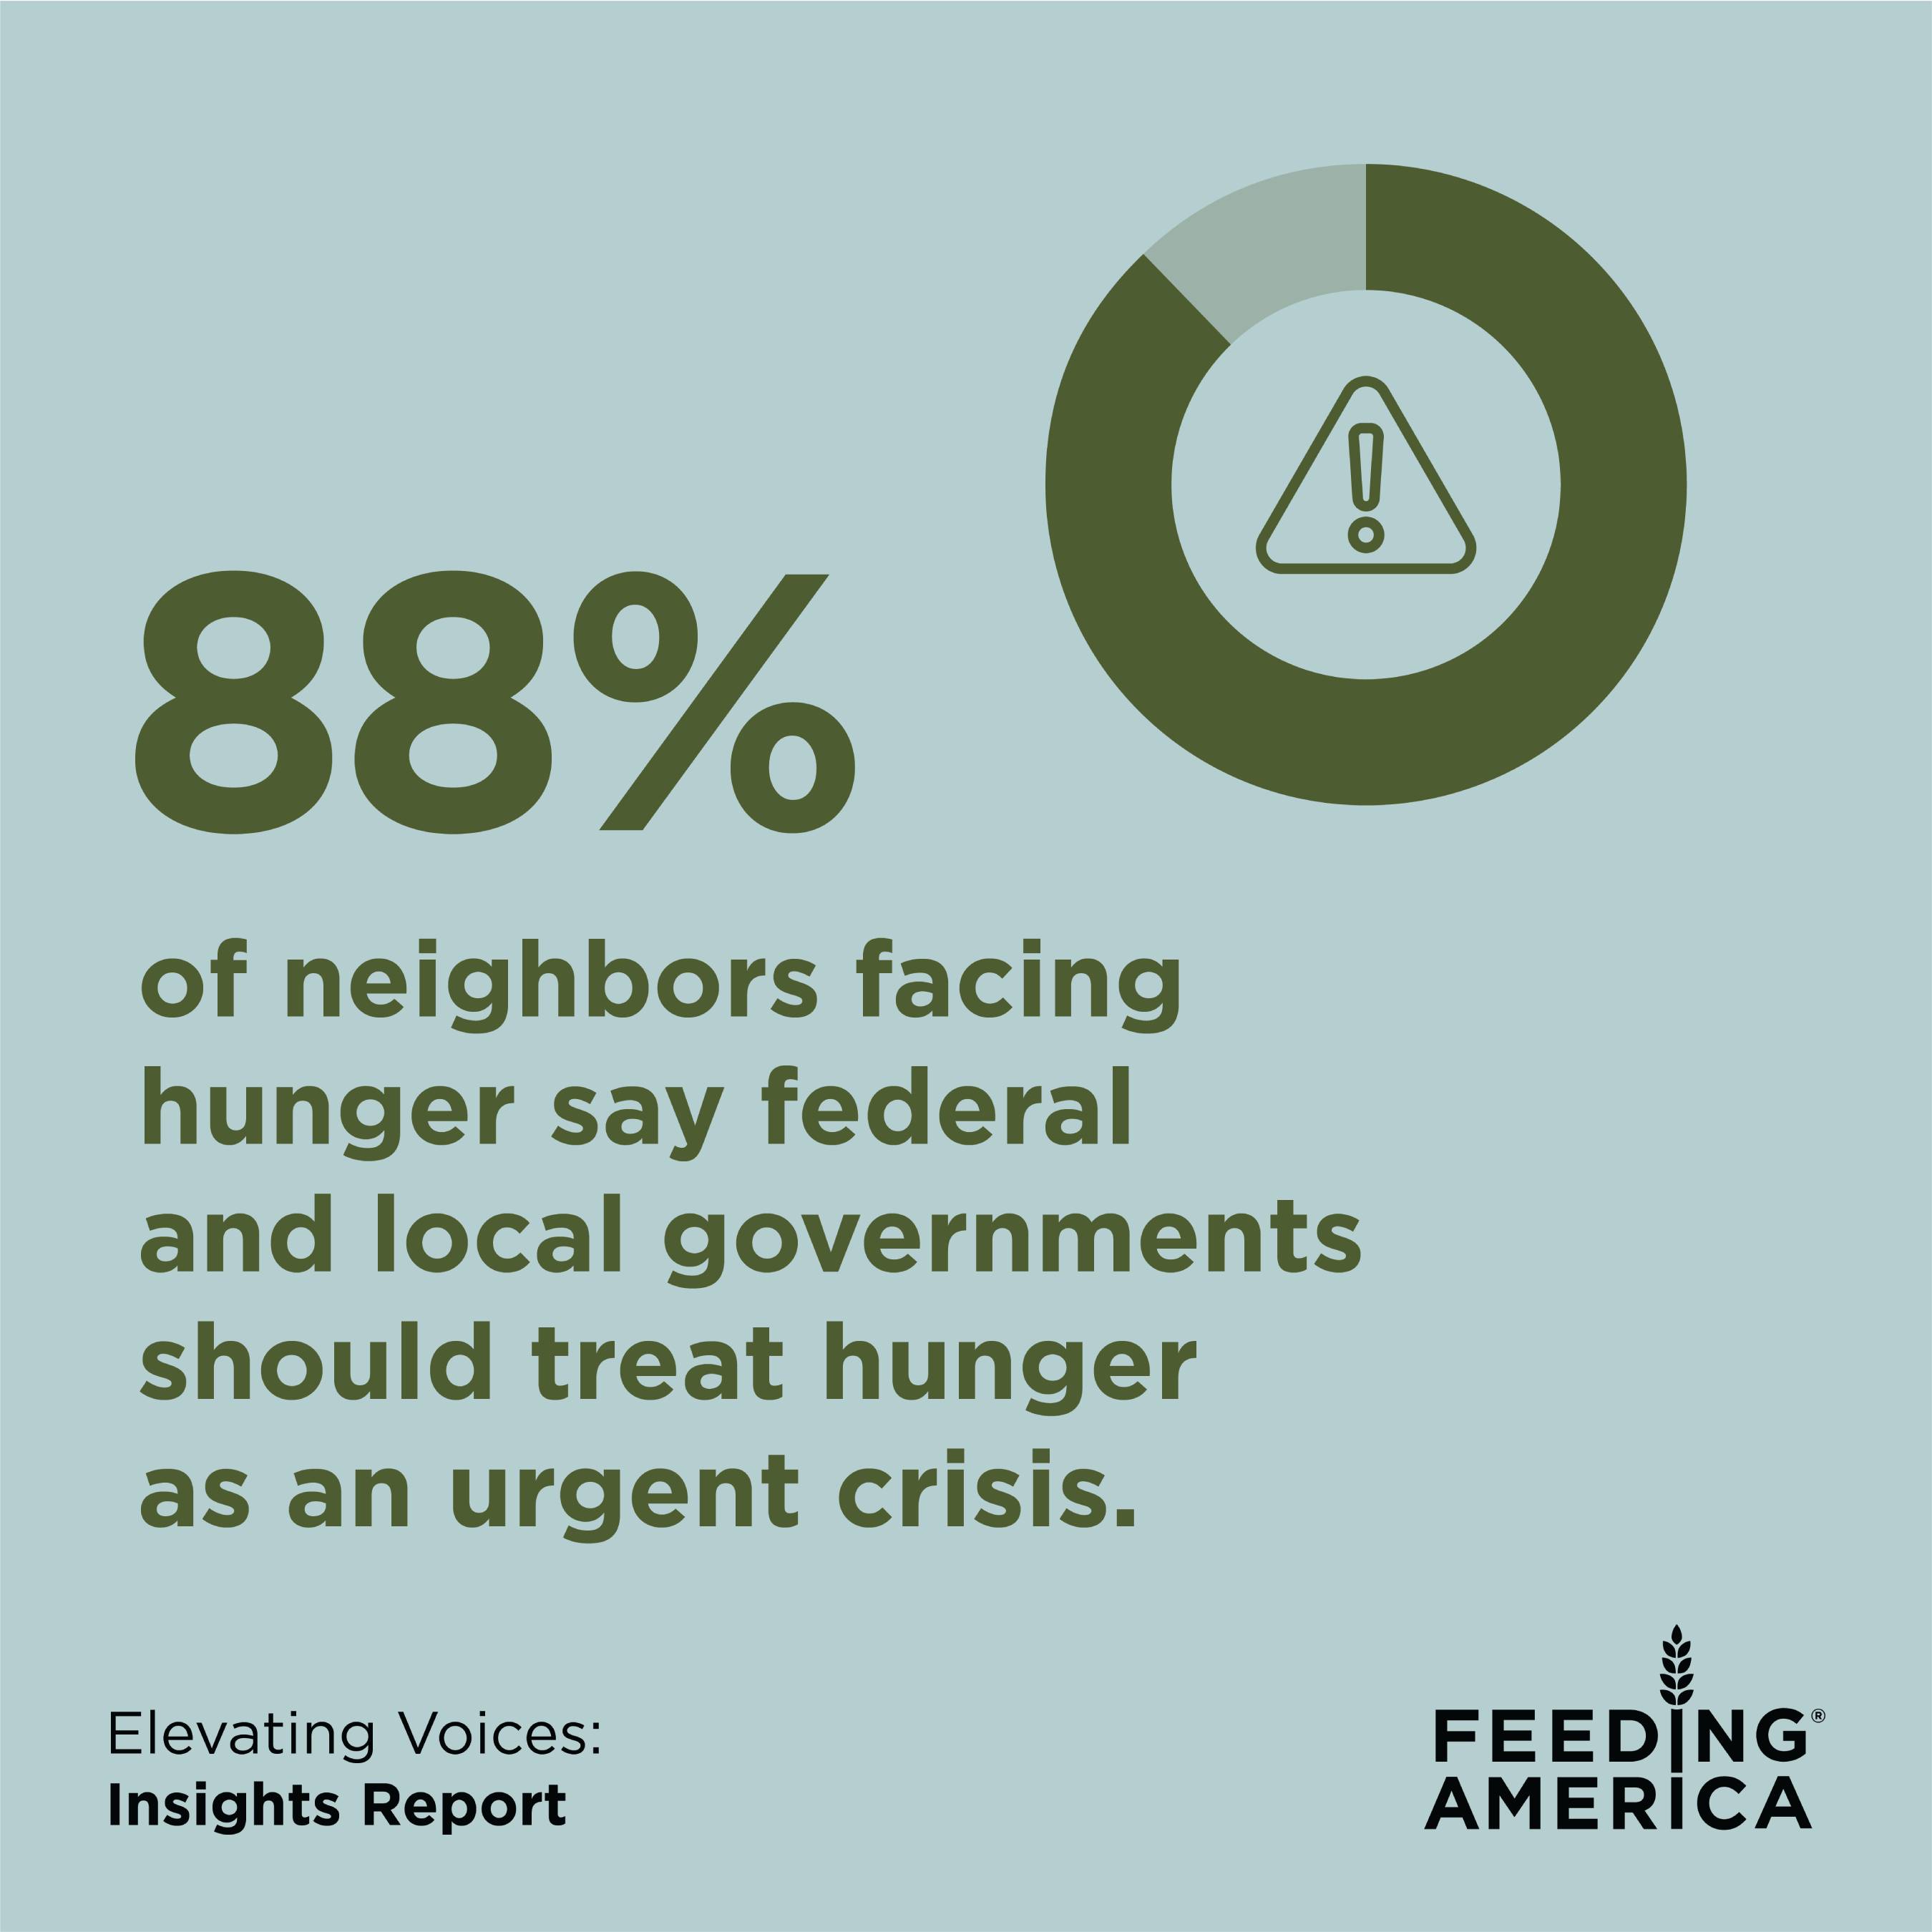 88% of neighbors facing hunger say federal and local governments should treat hunger as an urgent crisis.